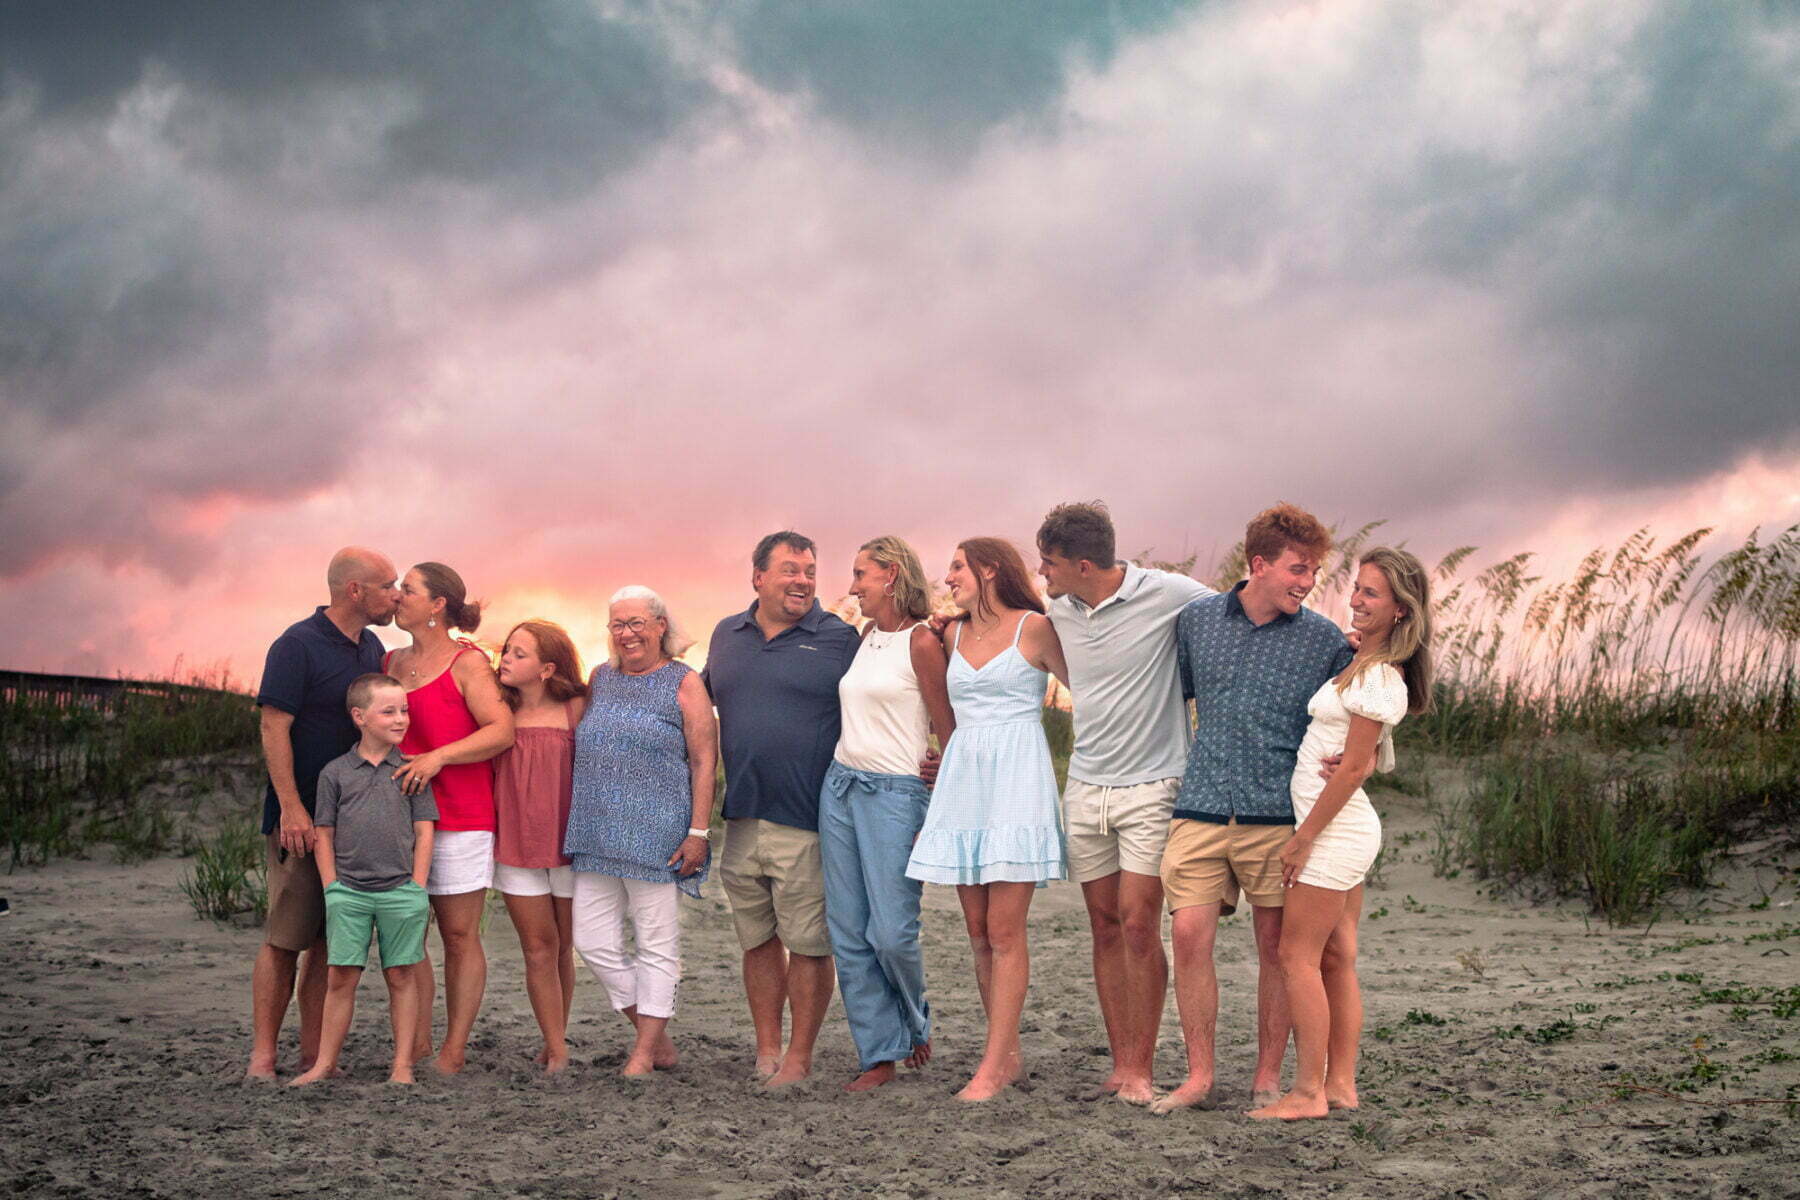 Extended lifestyle family photography session at Sunset Beach, NC.